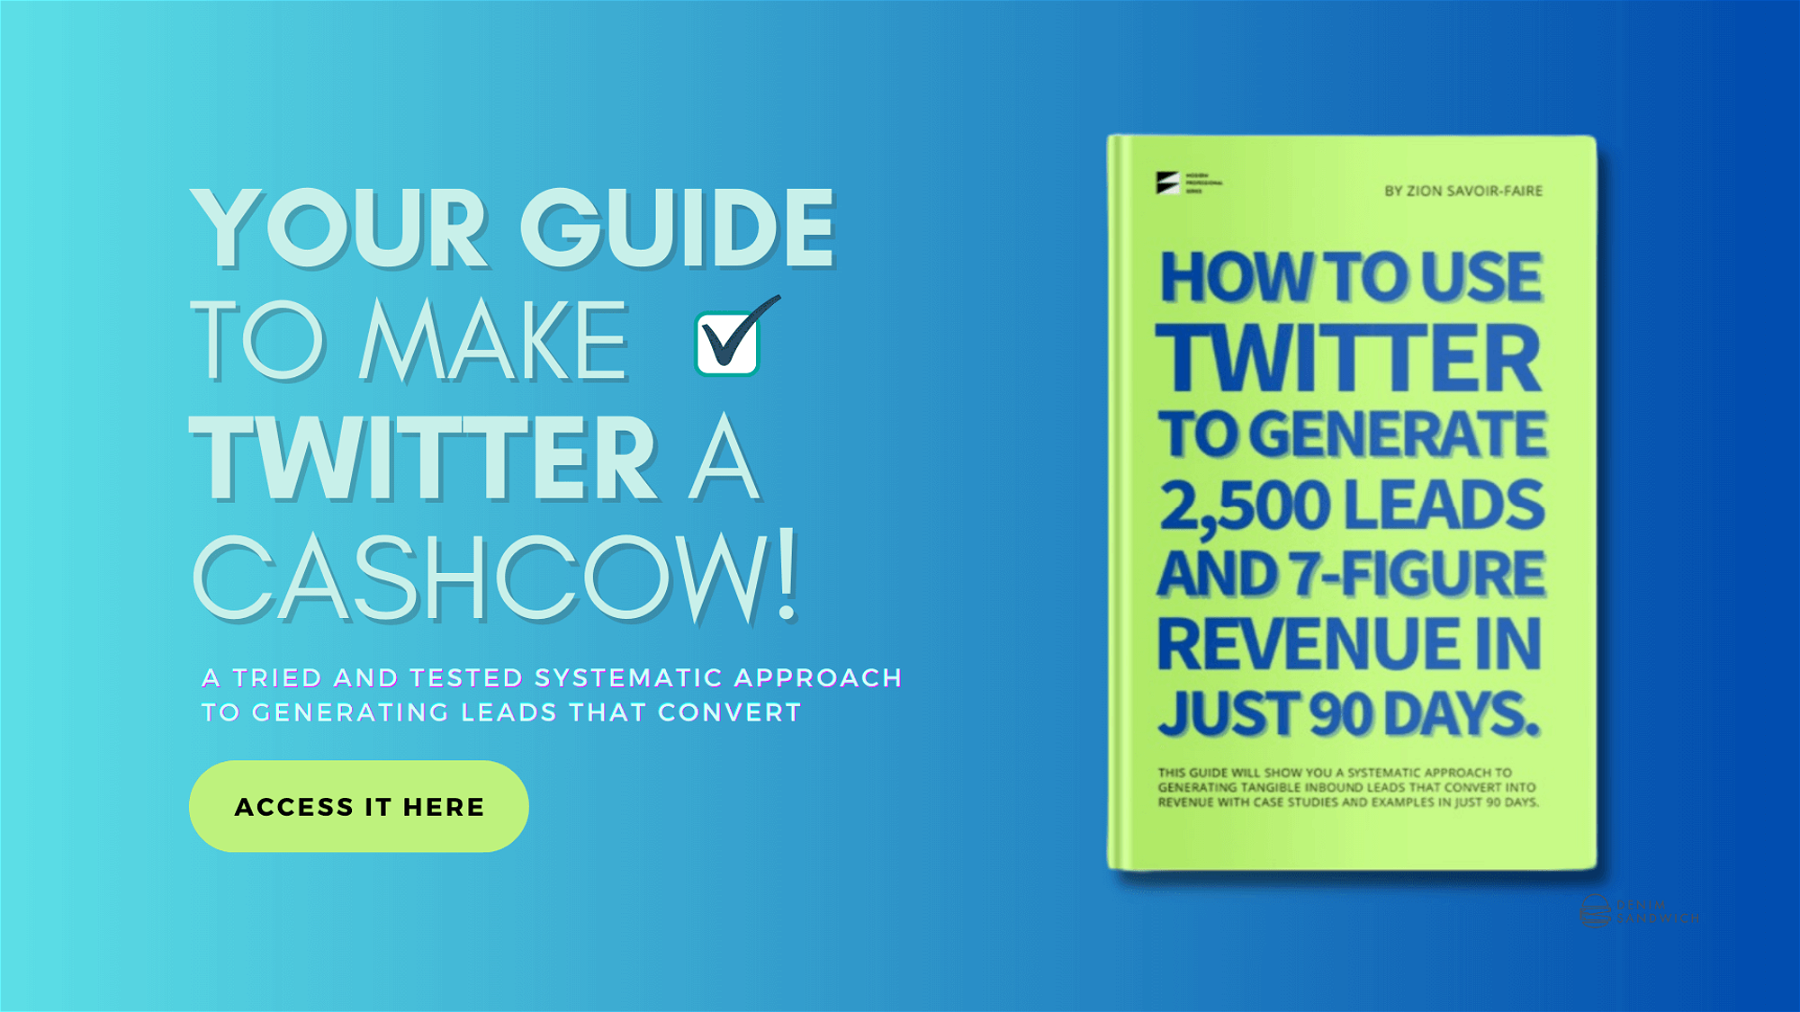 This guide wants to show you a systematic approach to generating over 2500 leads and over 7-figures in revenue, in as little as 90 days.